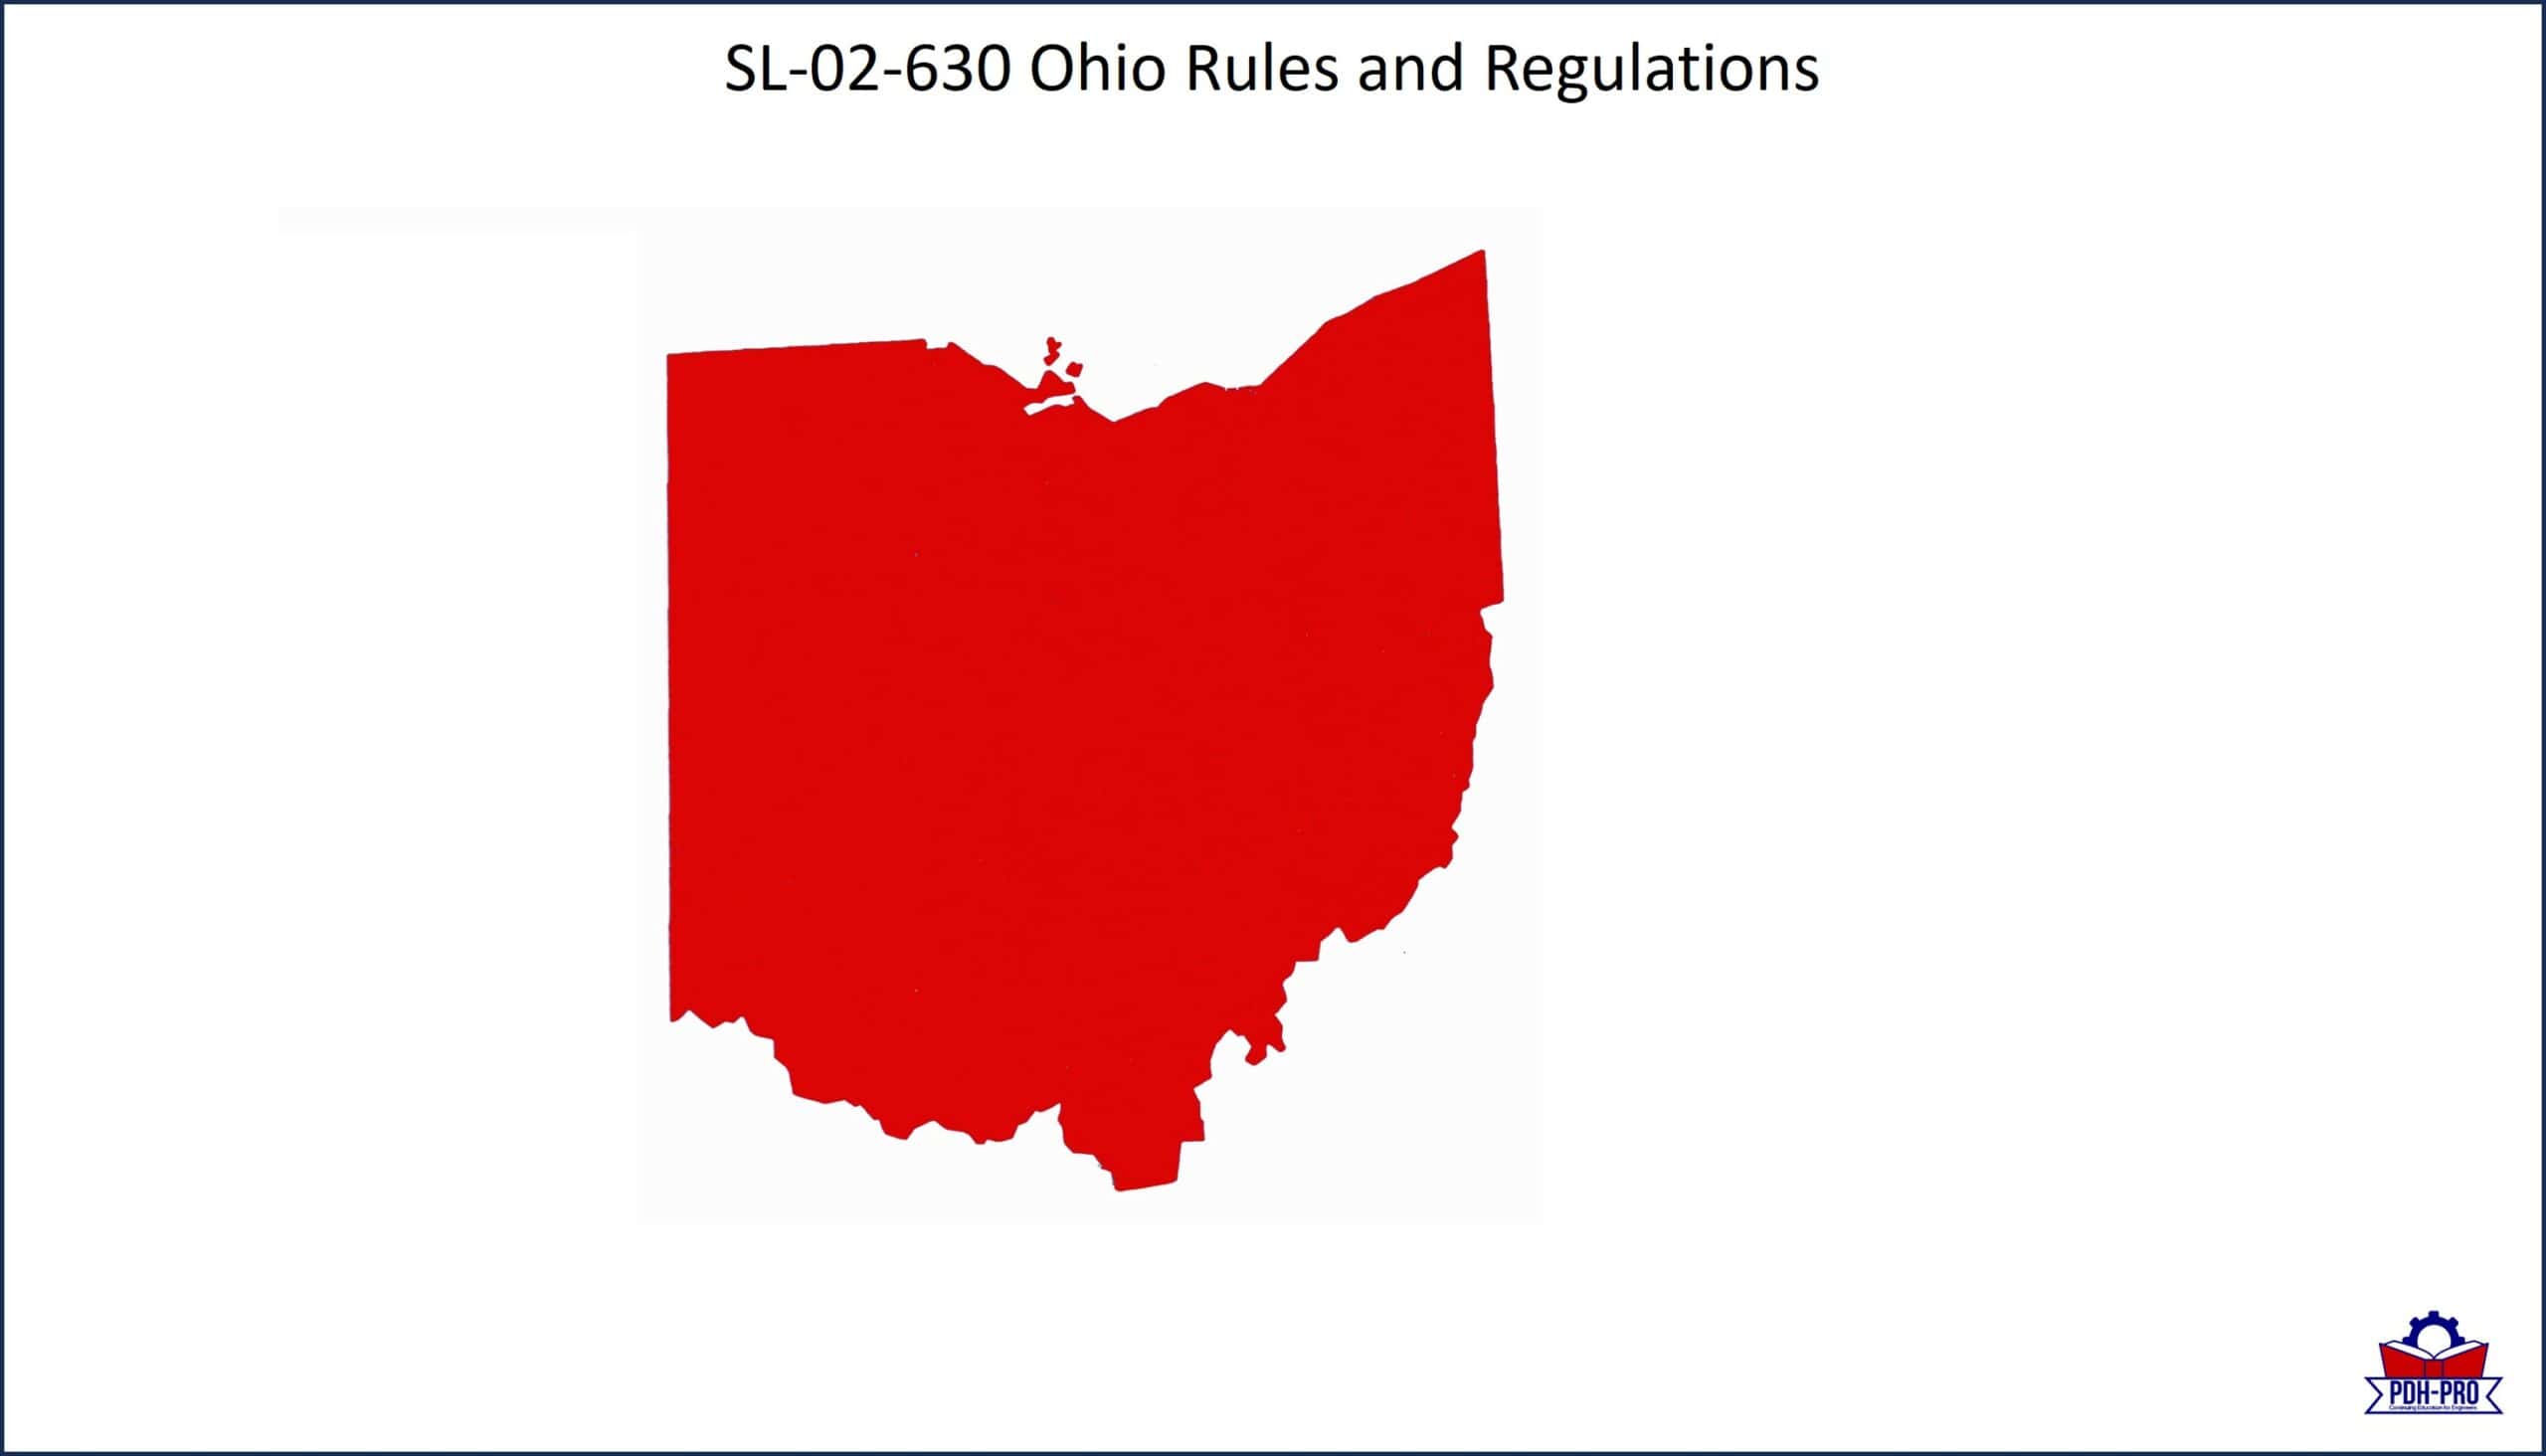 Ohio Rules and Regulations